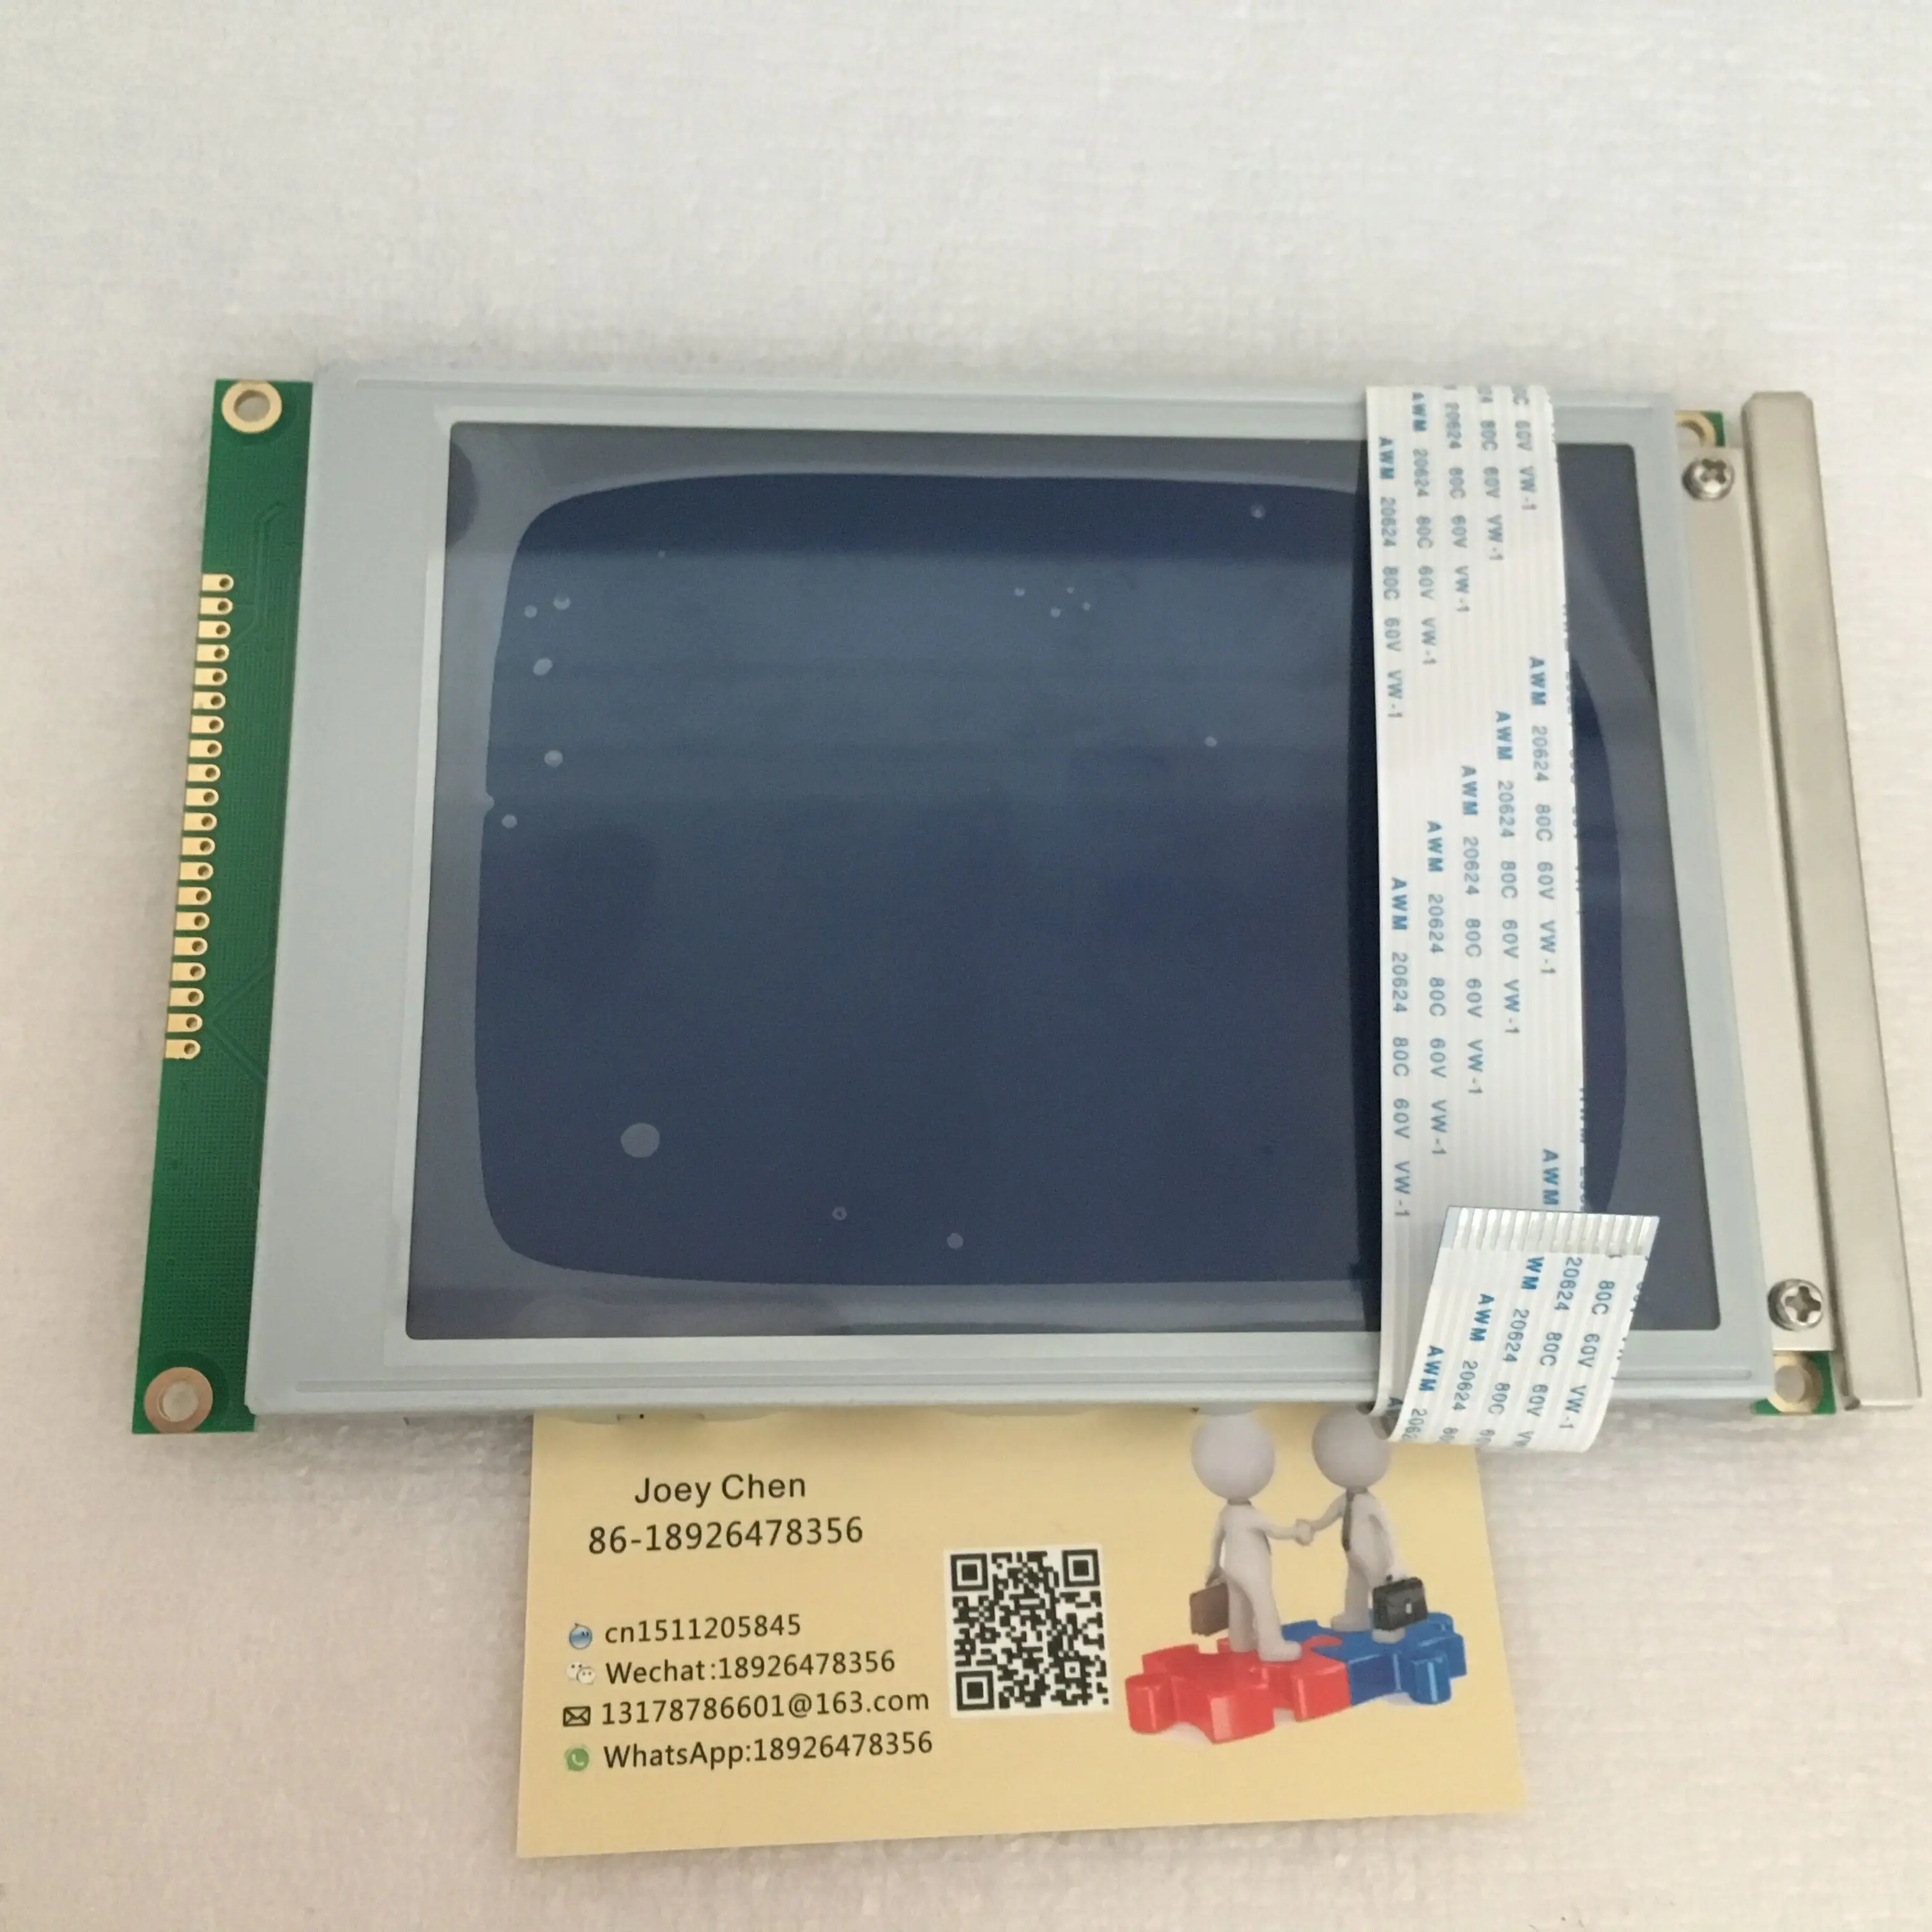 SP14Q005 100% New 5.7 Inch LCD Universal Screen for SP14Q005 SP14Q002-A1 SP14Q003-C1 DMF-50840 EW32F10BCW #H1991